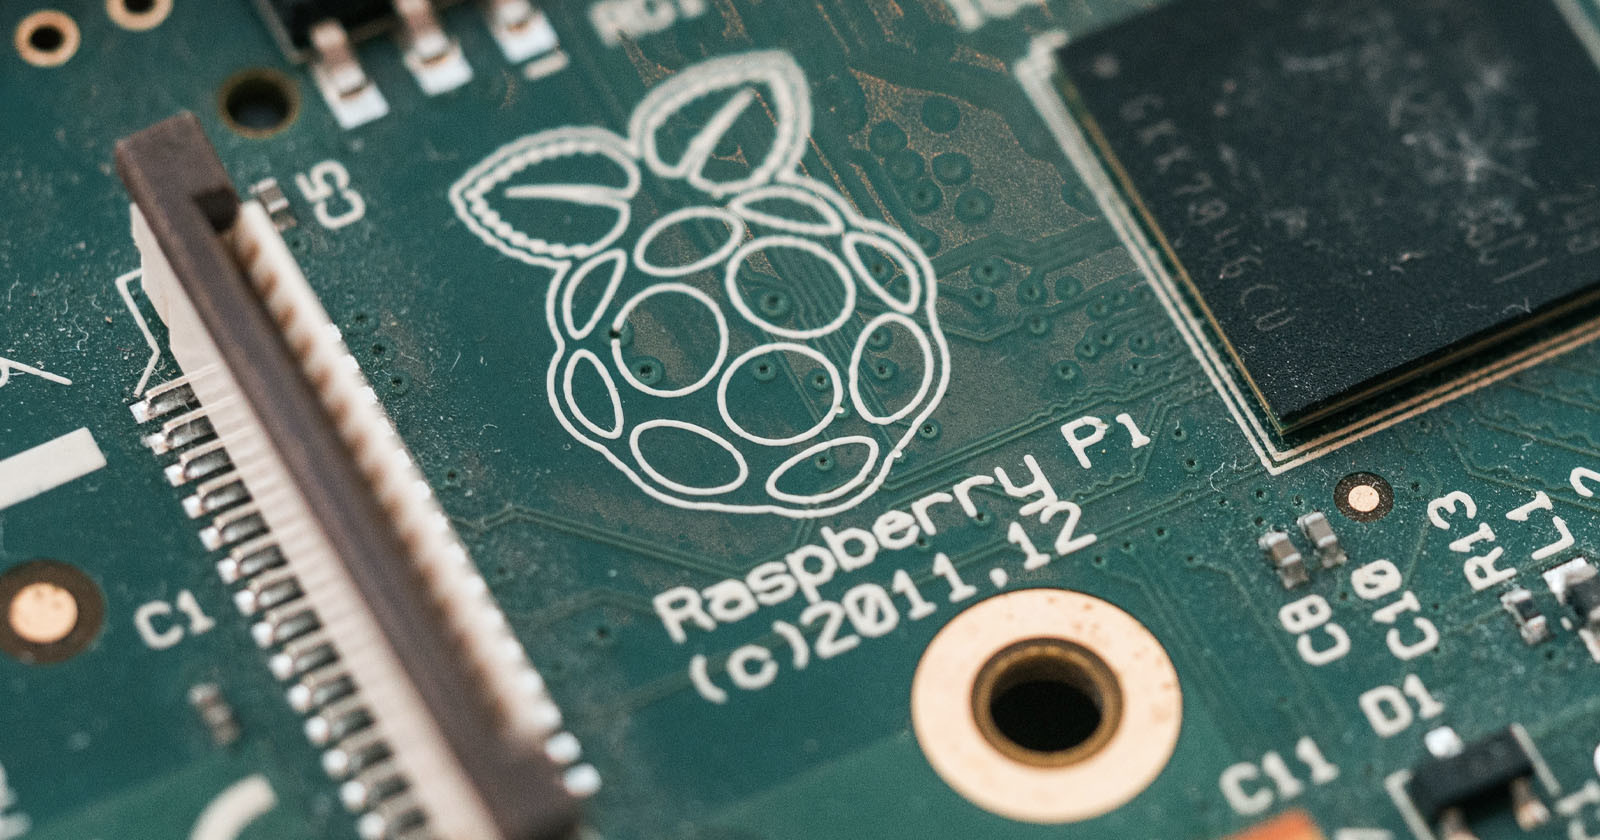  raspberry under fire creators who are upset hired 